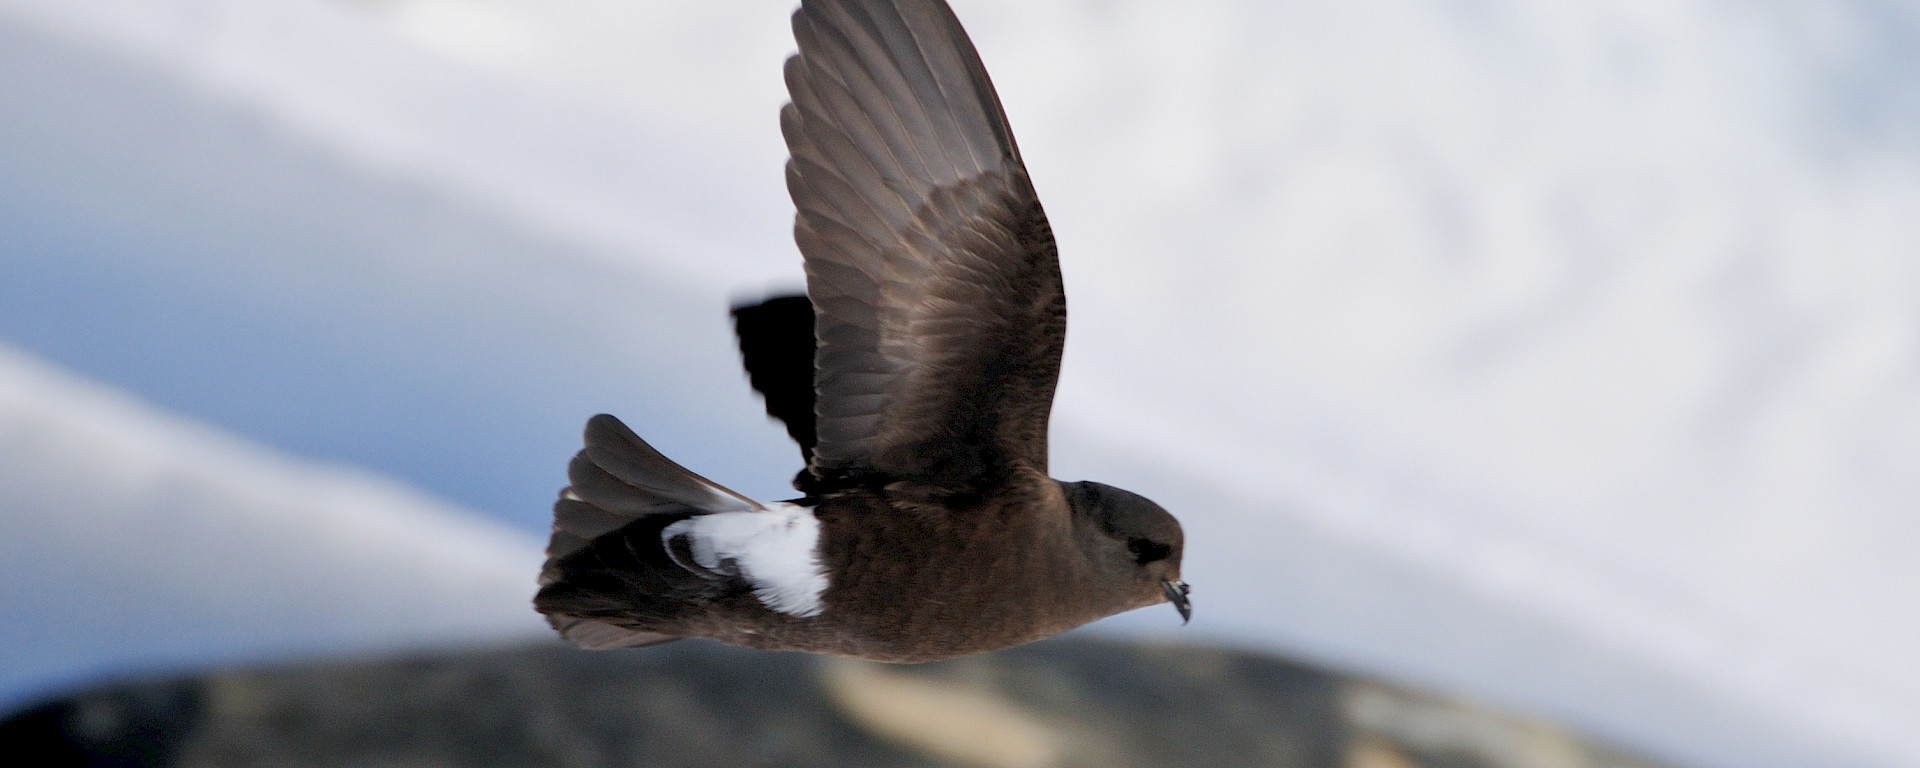 A brown bird flying over a snow and rock landscape.